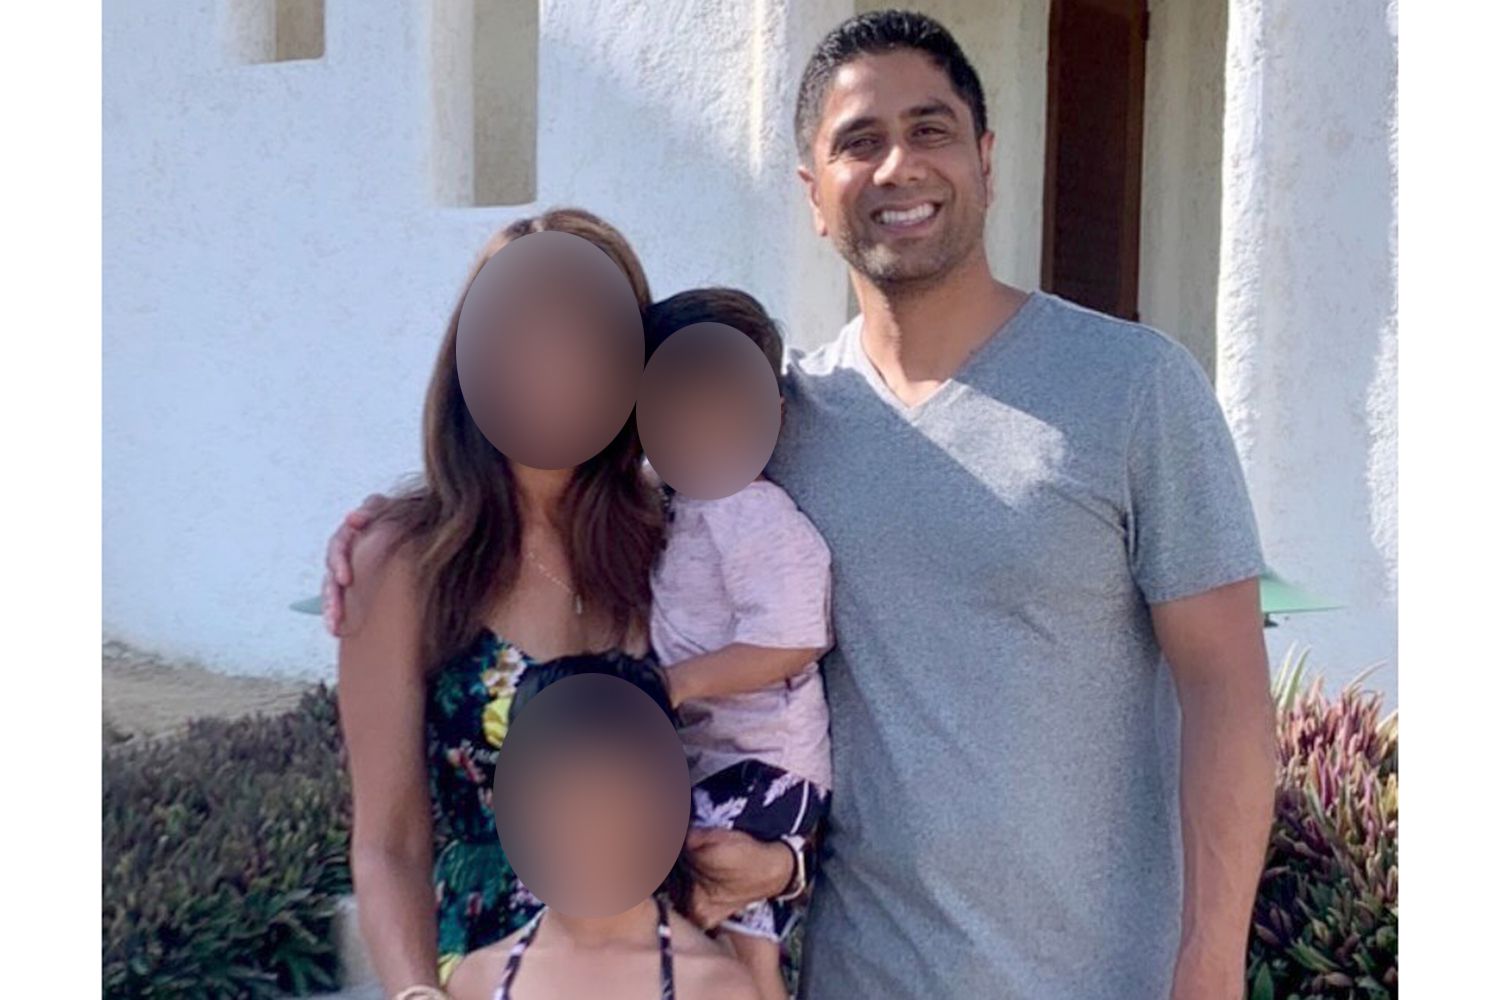 Why Wife of Doctor Who Drove Tesla Off Cliff Thinks His Return Home Will ‘Restore Our Family’ [Video]